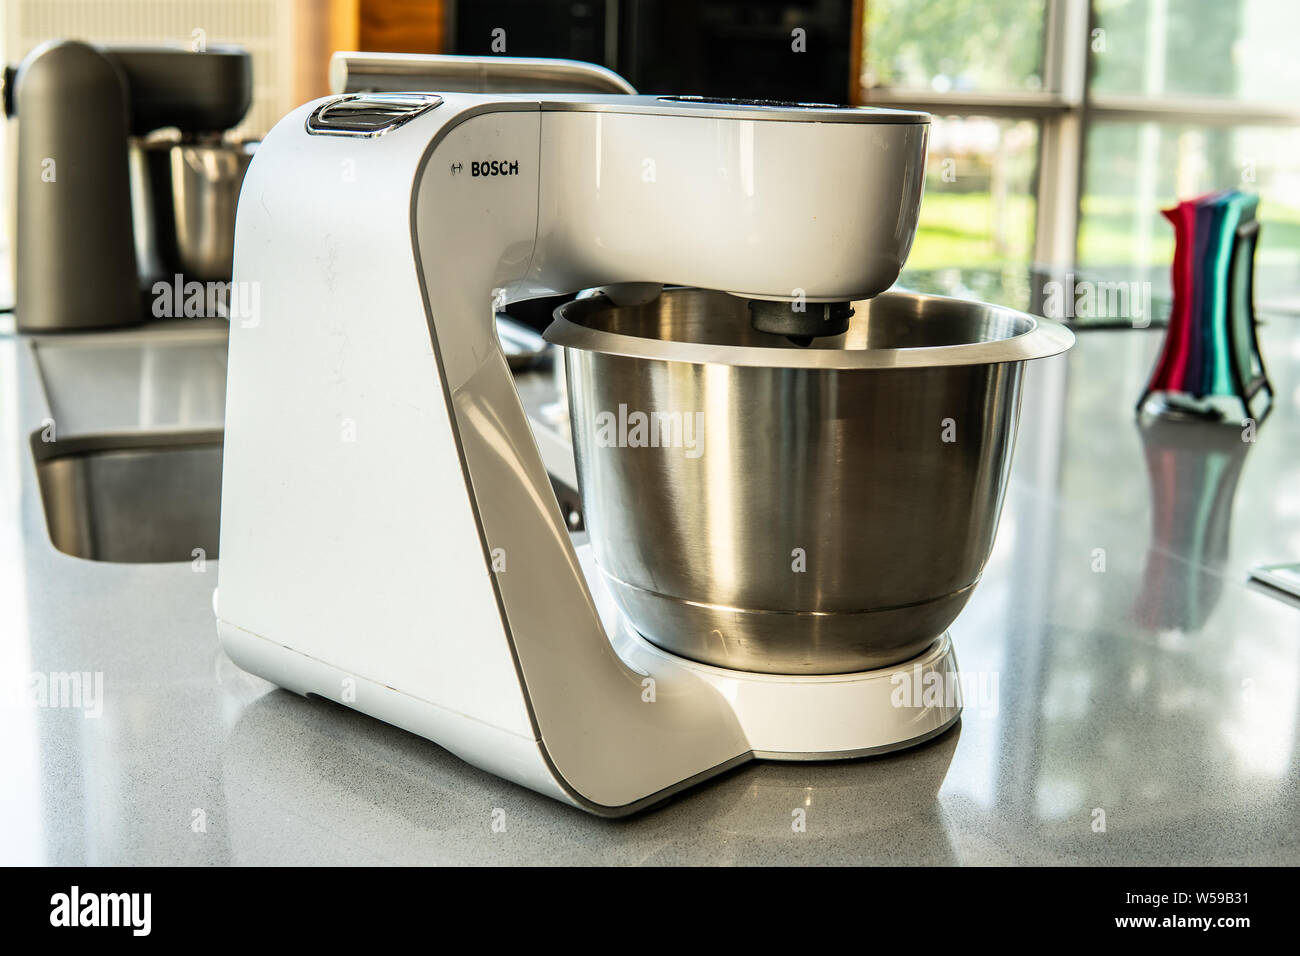 https://c8.alamy.com/comp/W59B31/warsaw-poland-july-2018-bosch-showroom-store-bosch-optimum-food-processor-kitchen-machine-on-display-for-sale-perfect-cooking-experience-W59B31.jpg